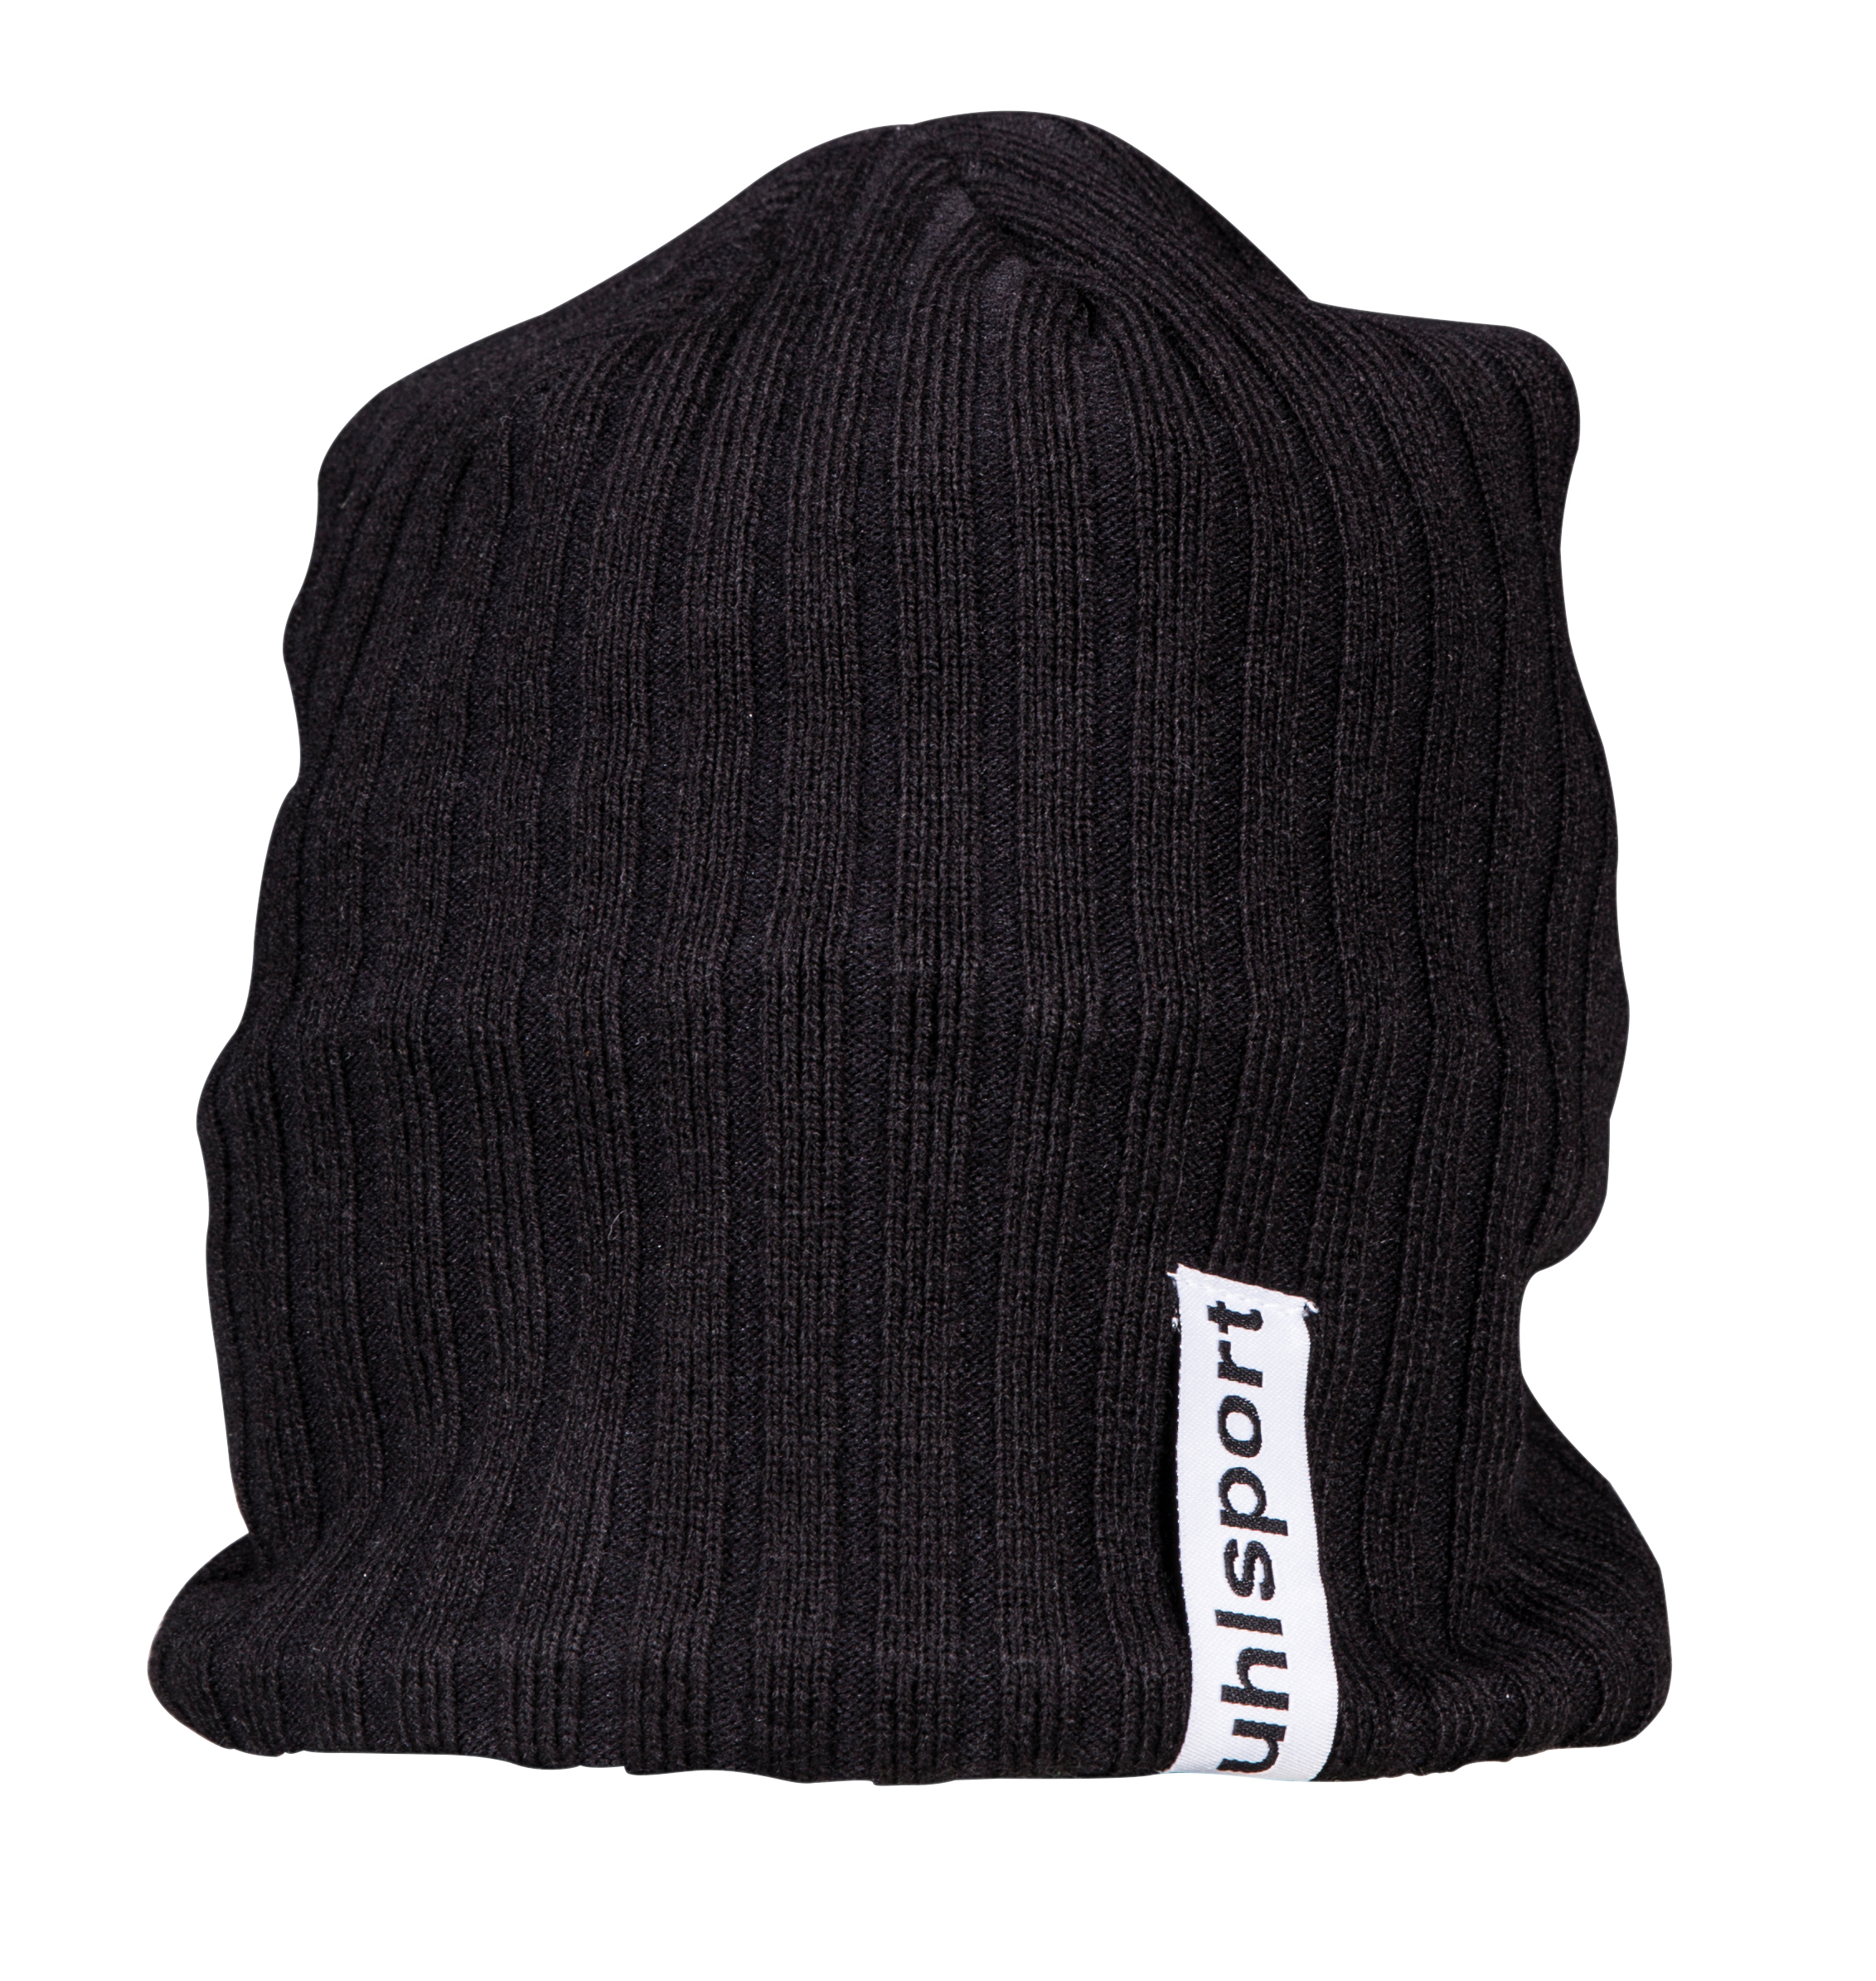 Uhlsport Knitted Cap